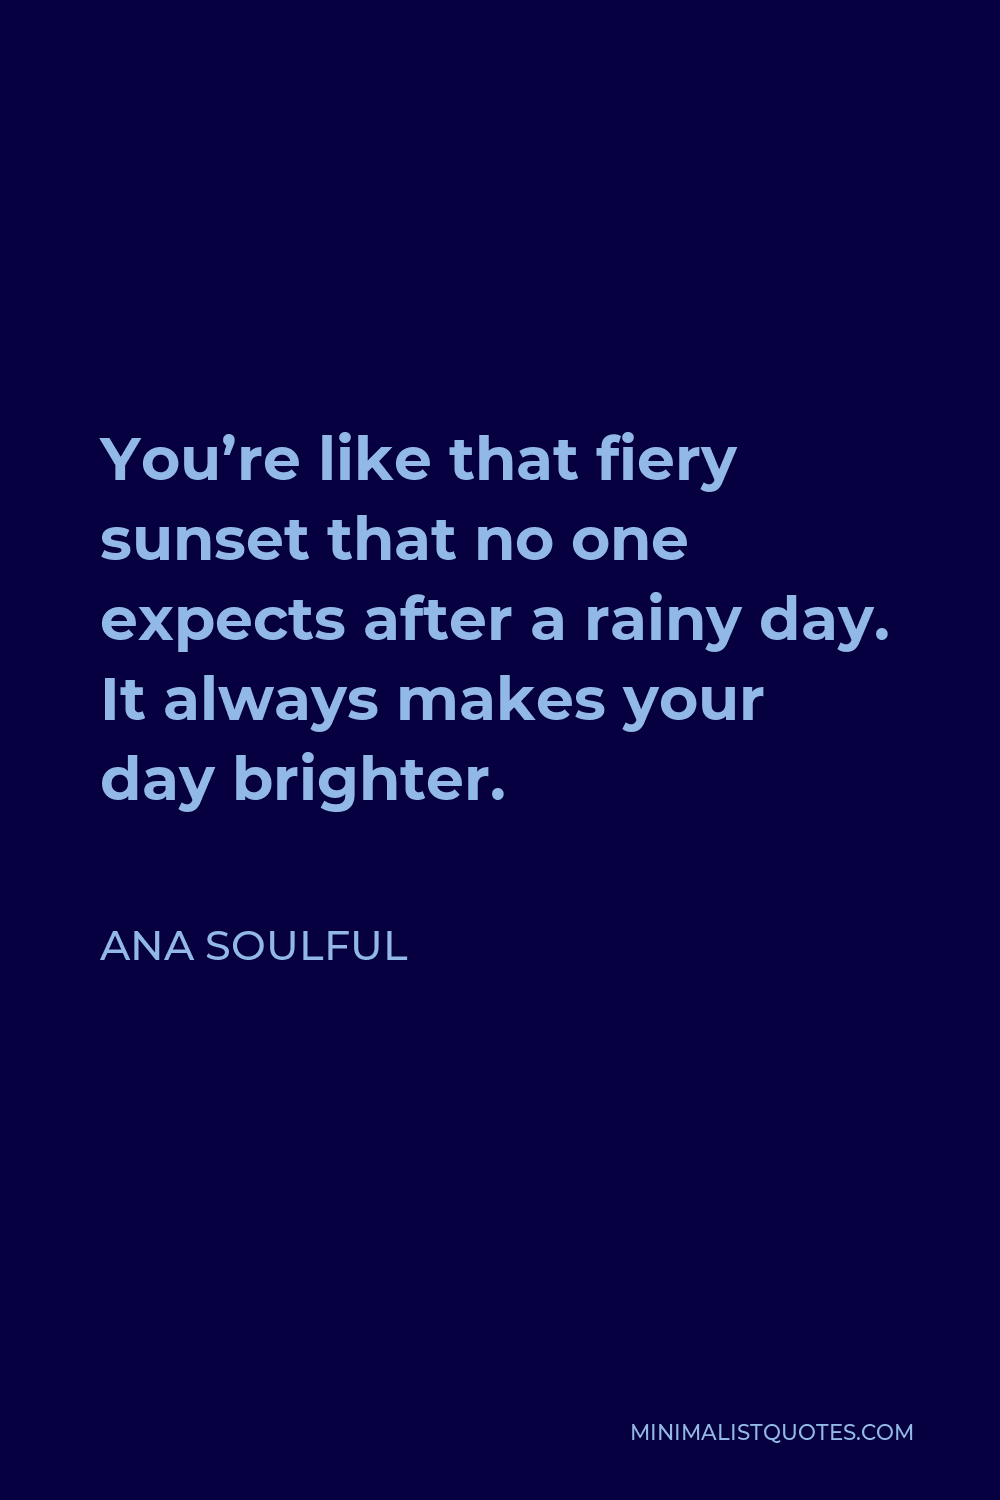 Ana Soulful Quote - You’re like that fiery sunset that no one expects after a rainy day. It always makes your day brighter.